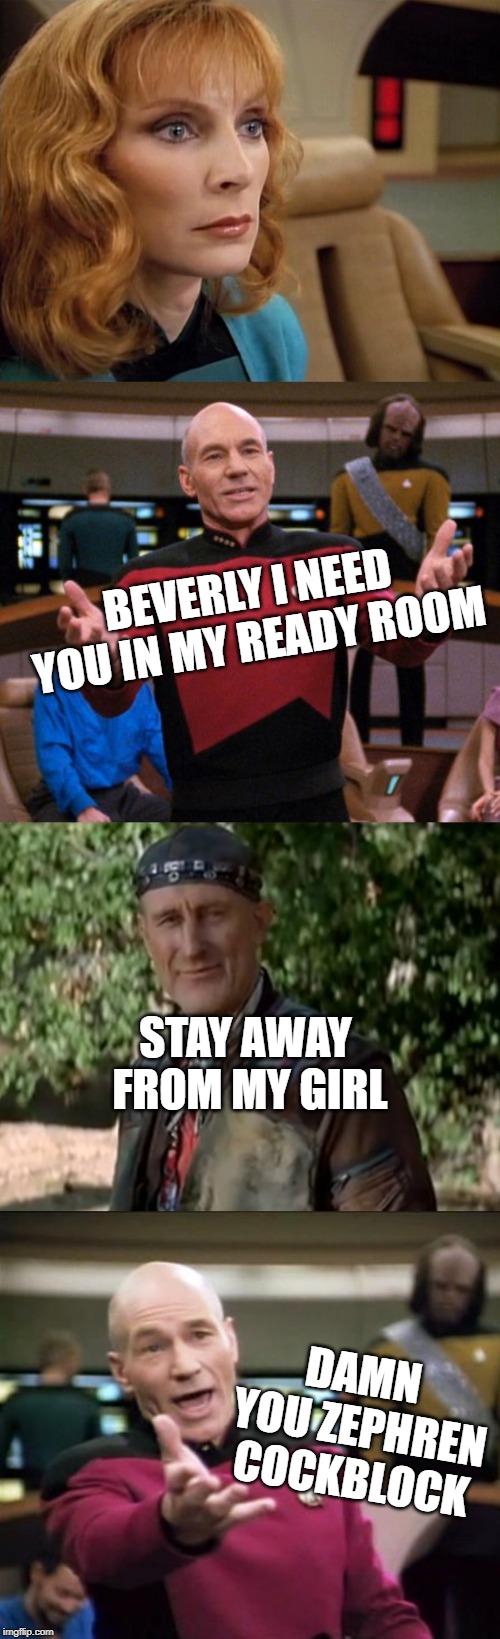 BEVERLY I NEED YOU IN MY READY ROOM; STAY AWAY FROM MY GIRL; DAMN YOU ZEPHREN COCKBLOCK | image tagged in piccard,jean luc picard,dr crusher,zephren cochran | made w/ Imgflip meme maker